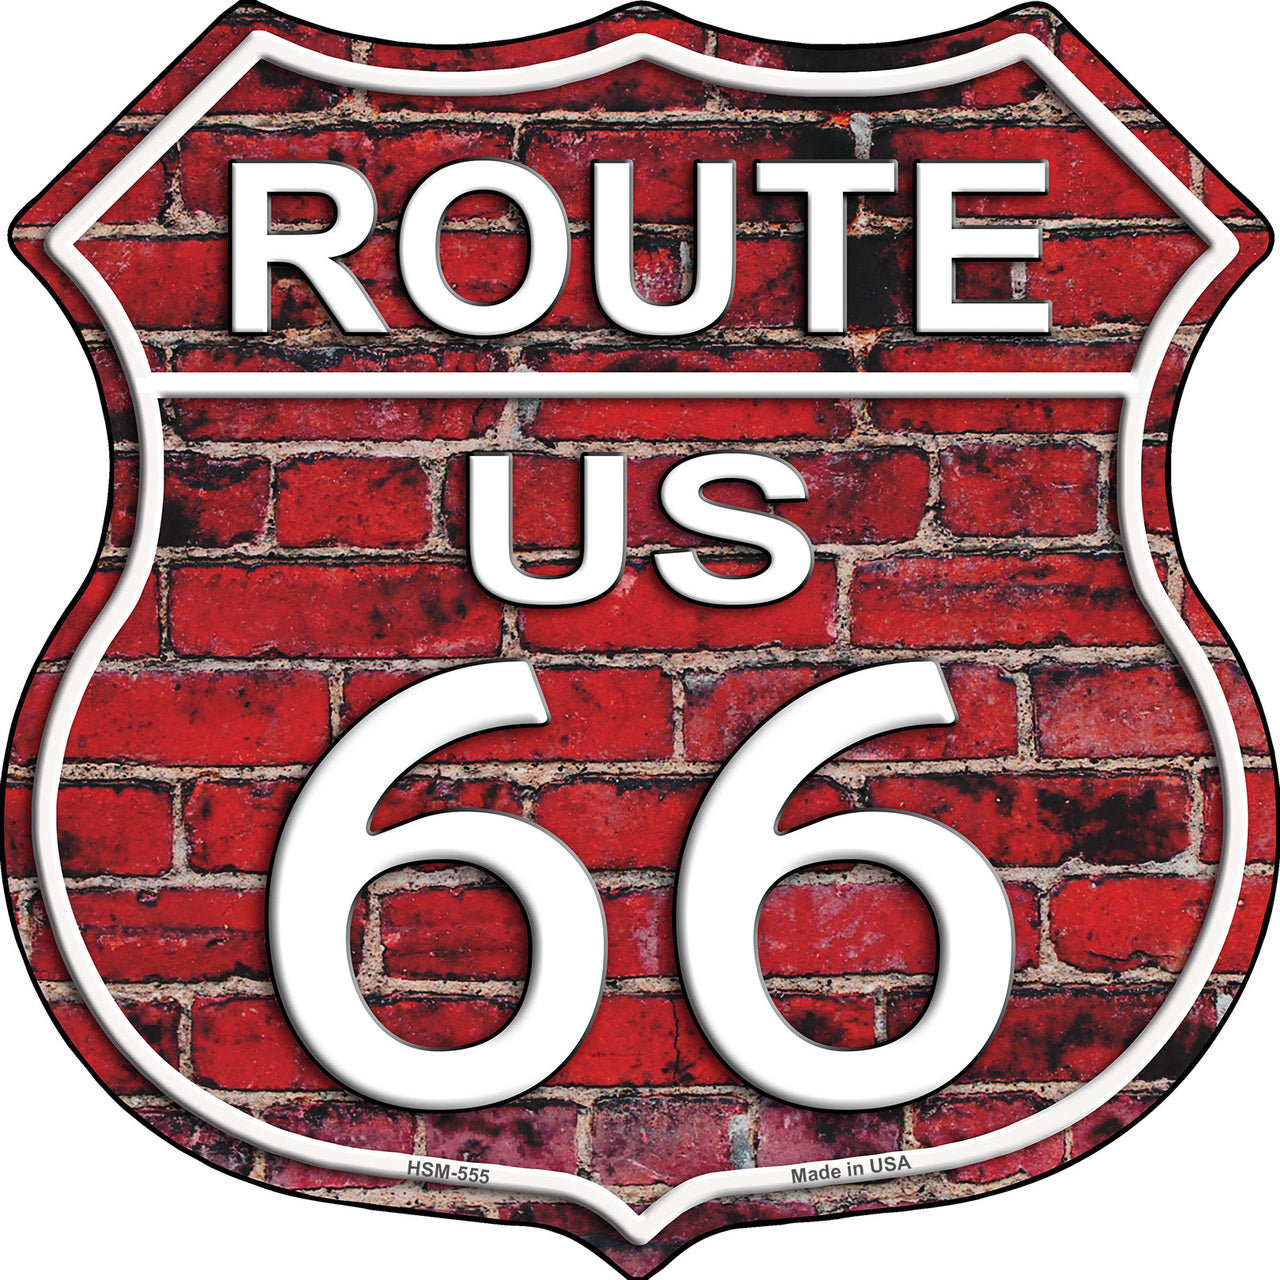 Route 66 Red Brick Wall Highway Shield Novelty Metal Magnet HSM-555